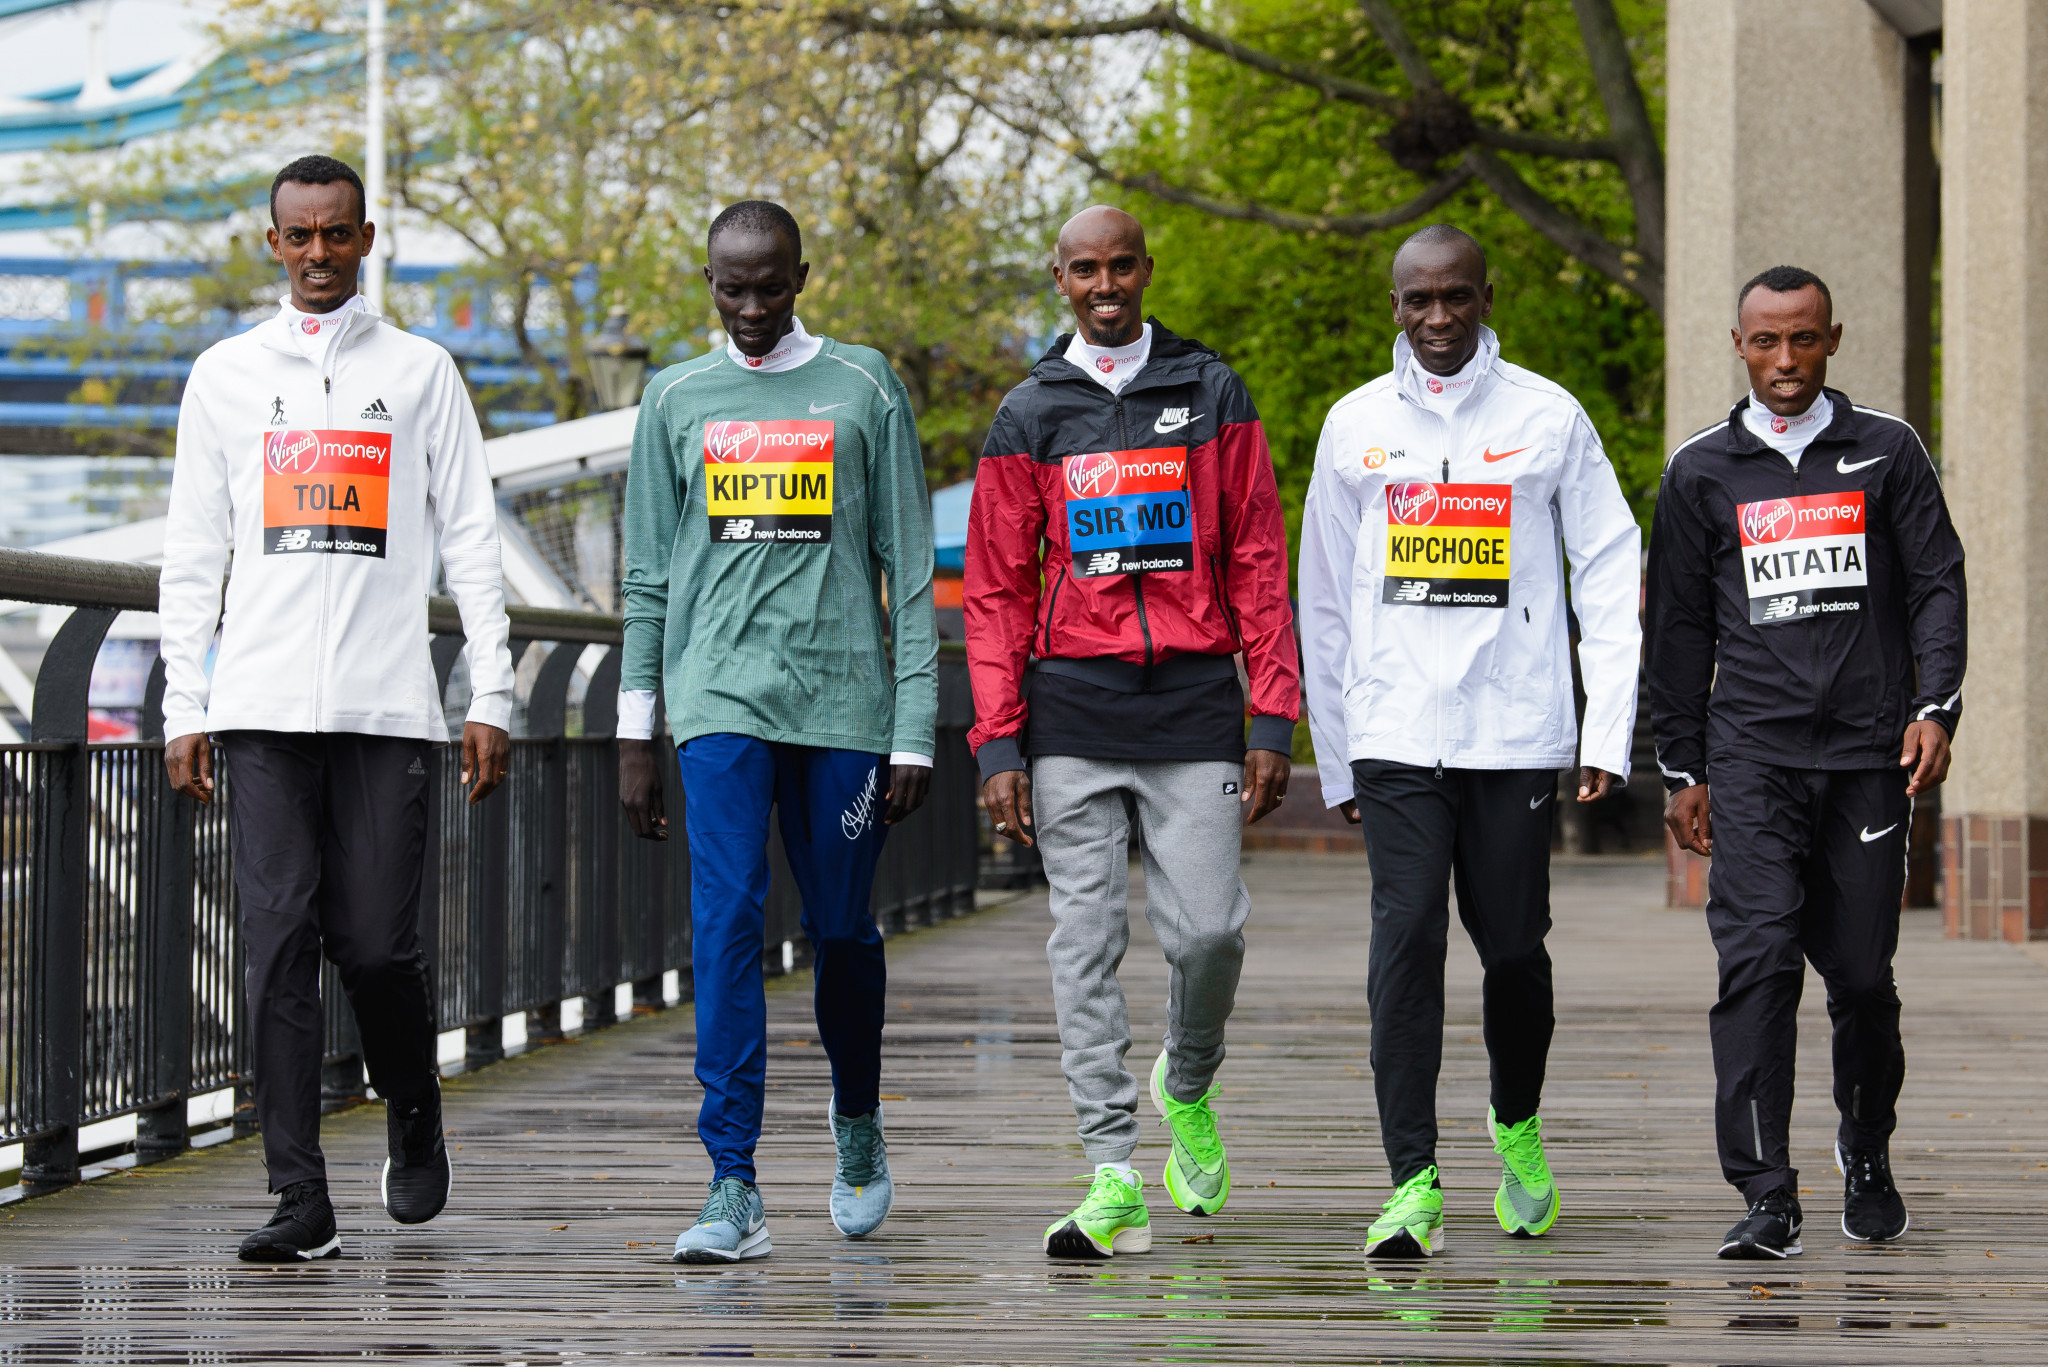 Abraham Kiptum had been provisionally suspended two days before this year's London Marathon ©Getty Images